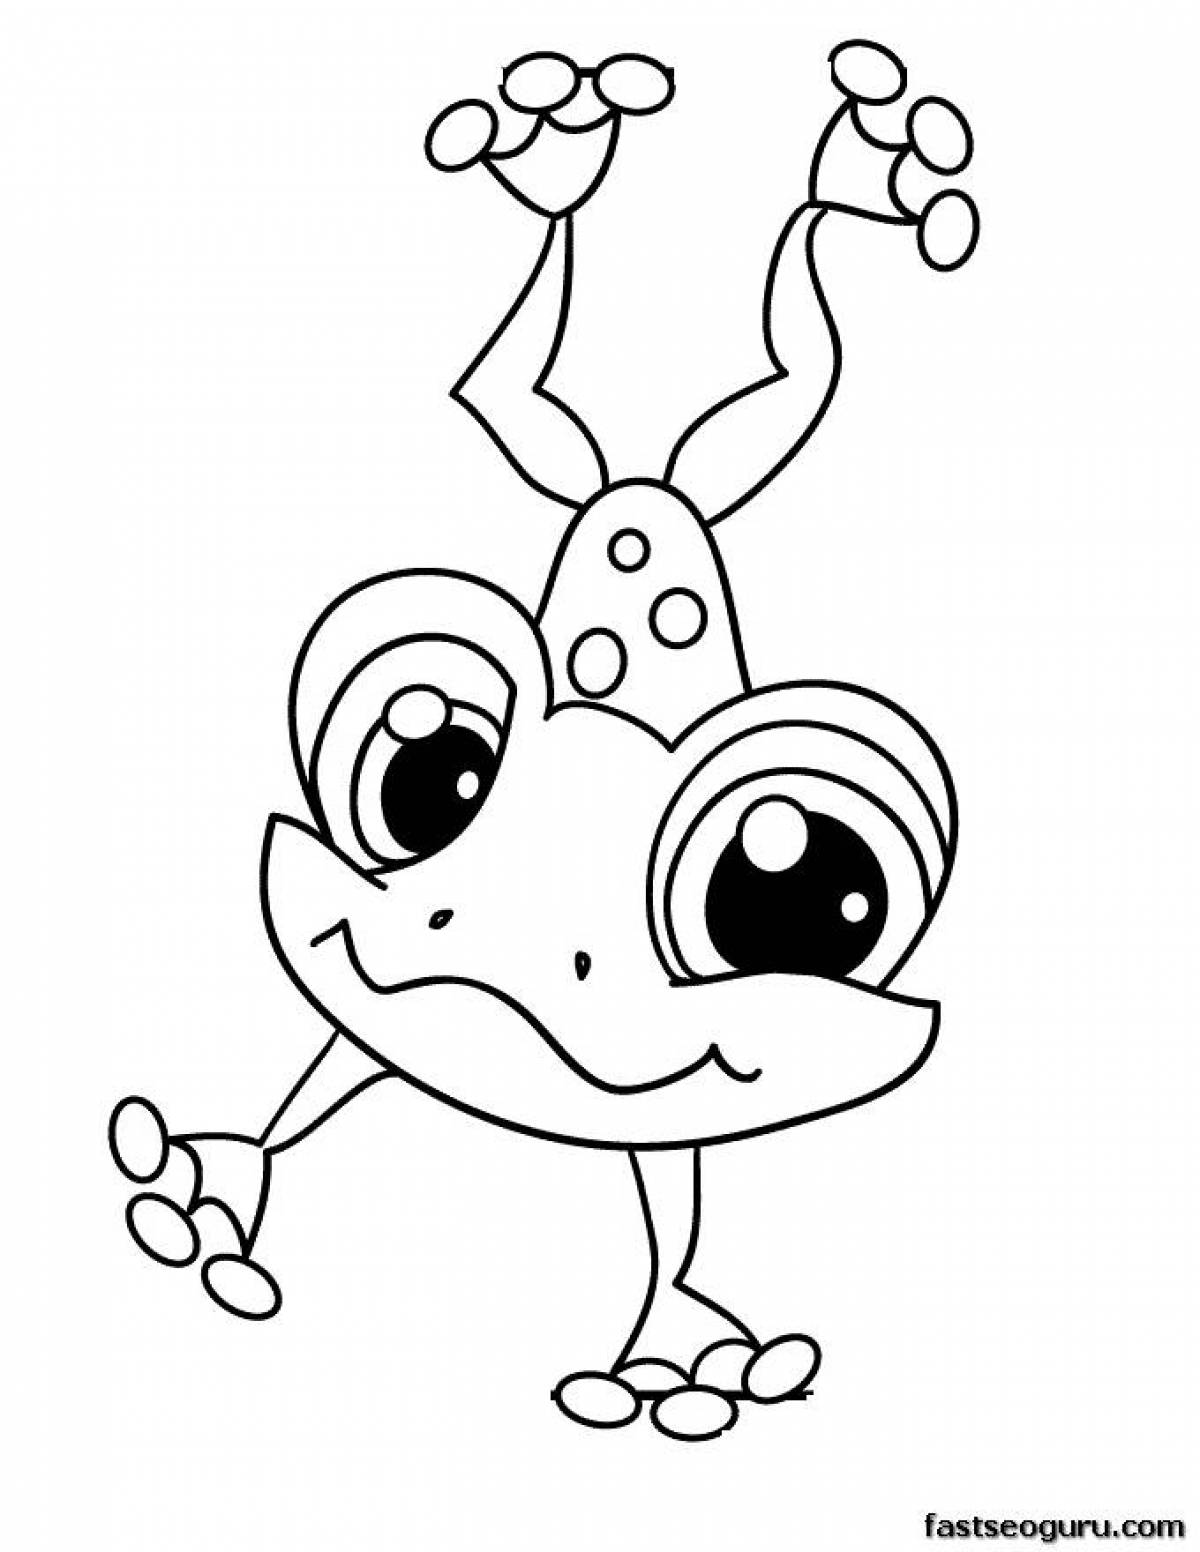 Peppy frog coloring